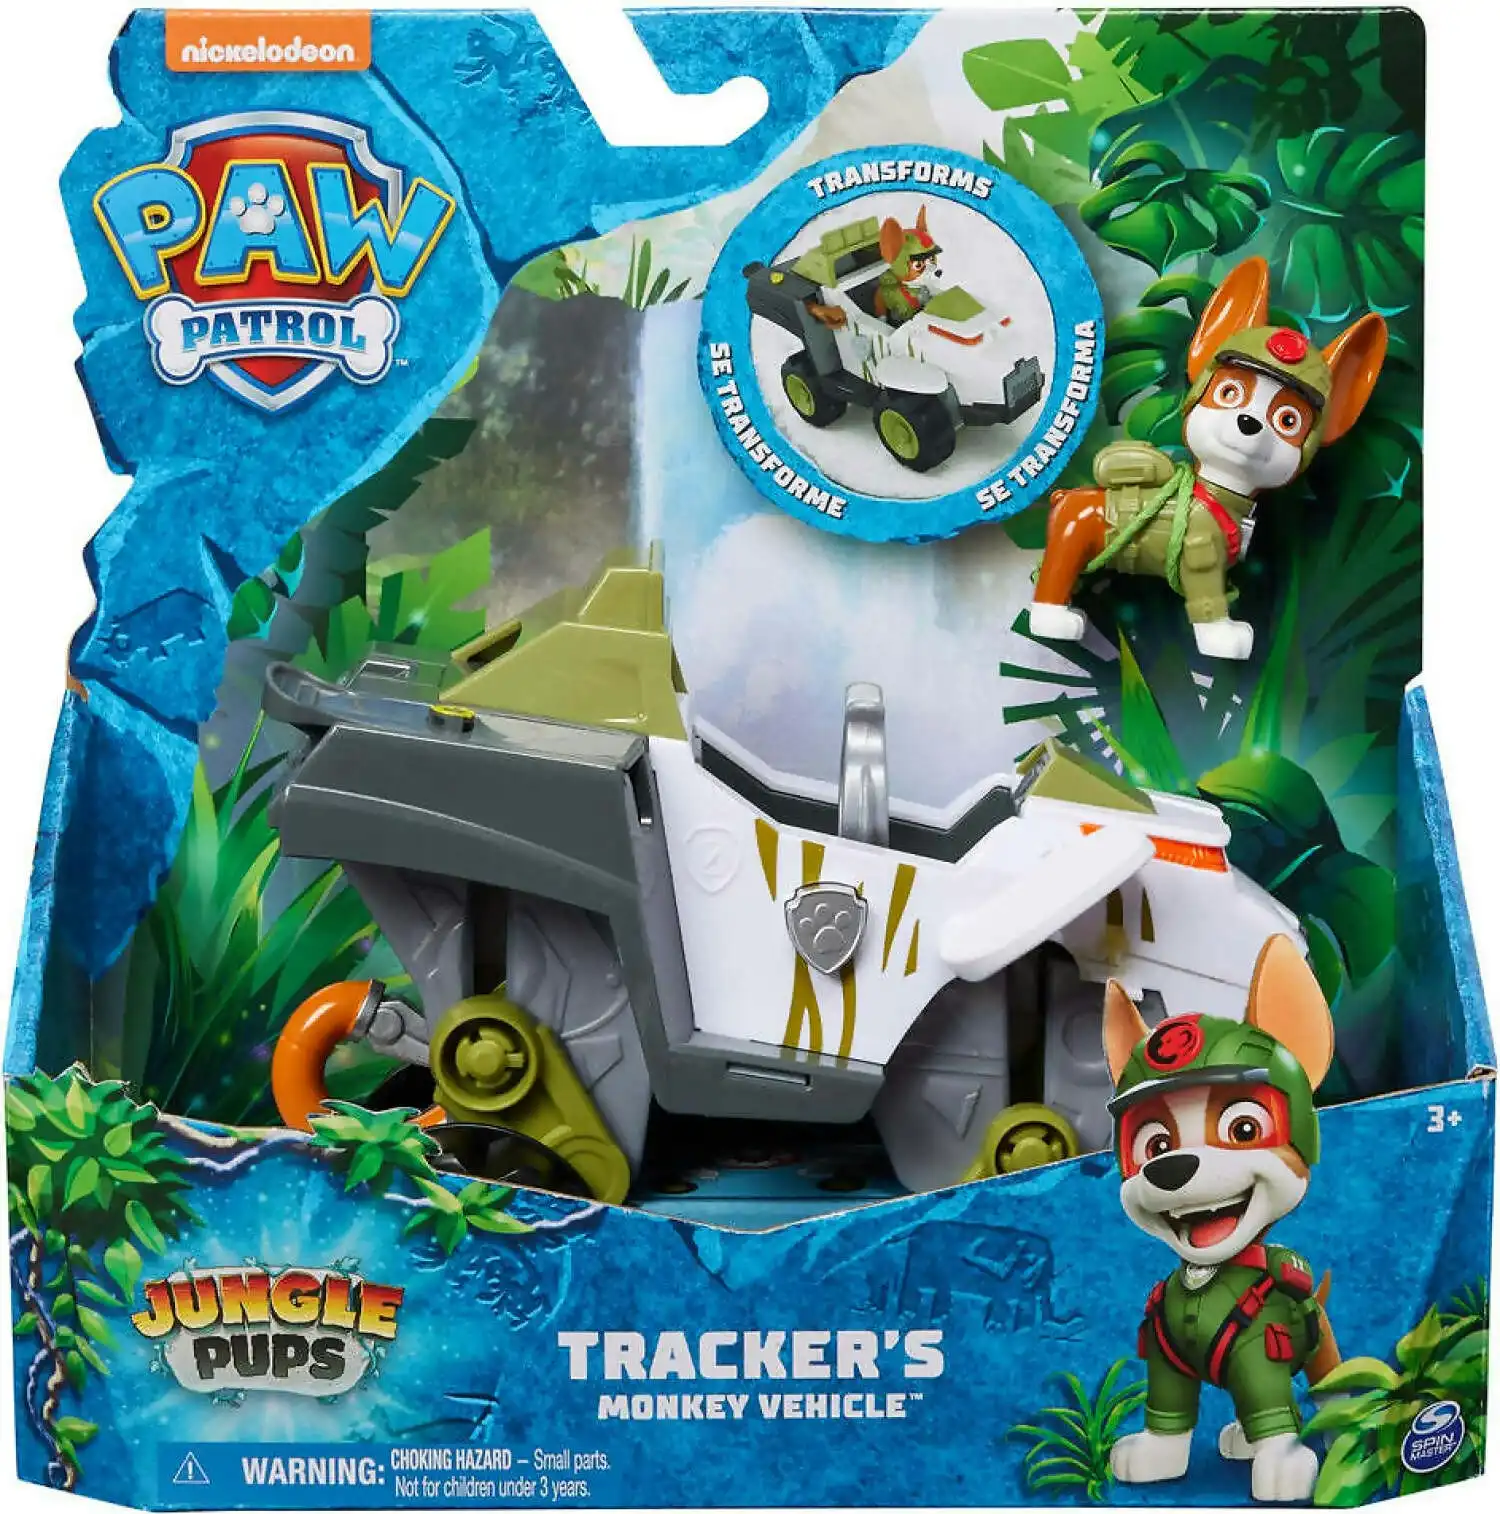 Paw Patrol - Jungle Pups Tractor's Monkey Vehicle - Spin Master